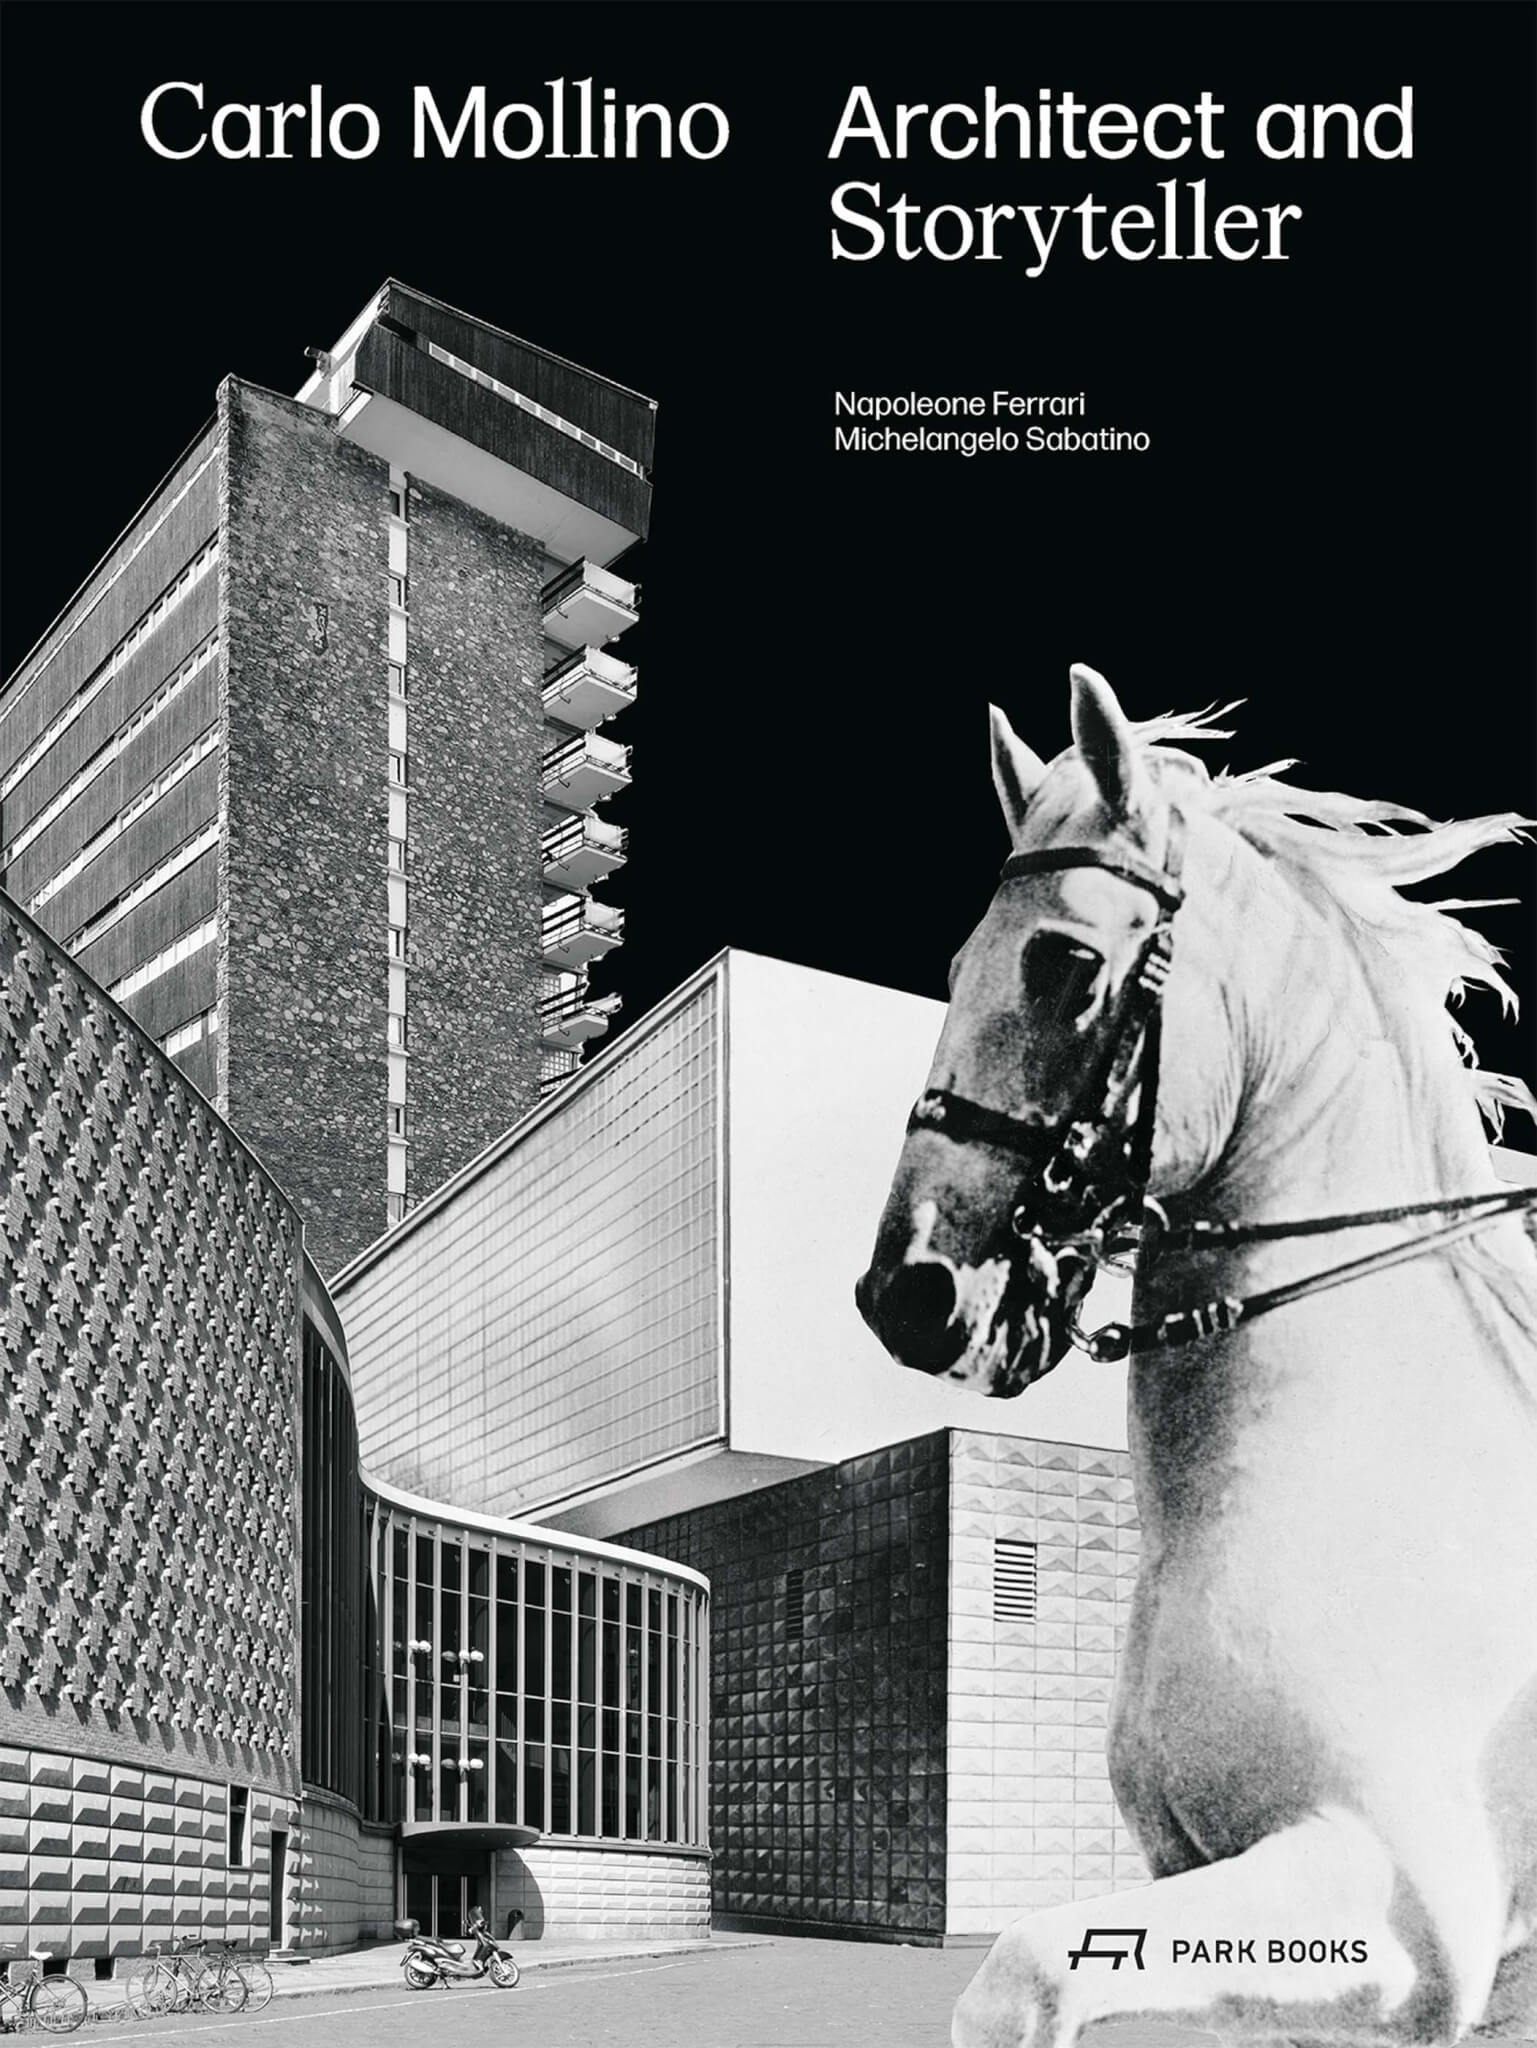 book cover with image of horse and building